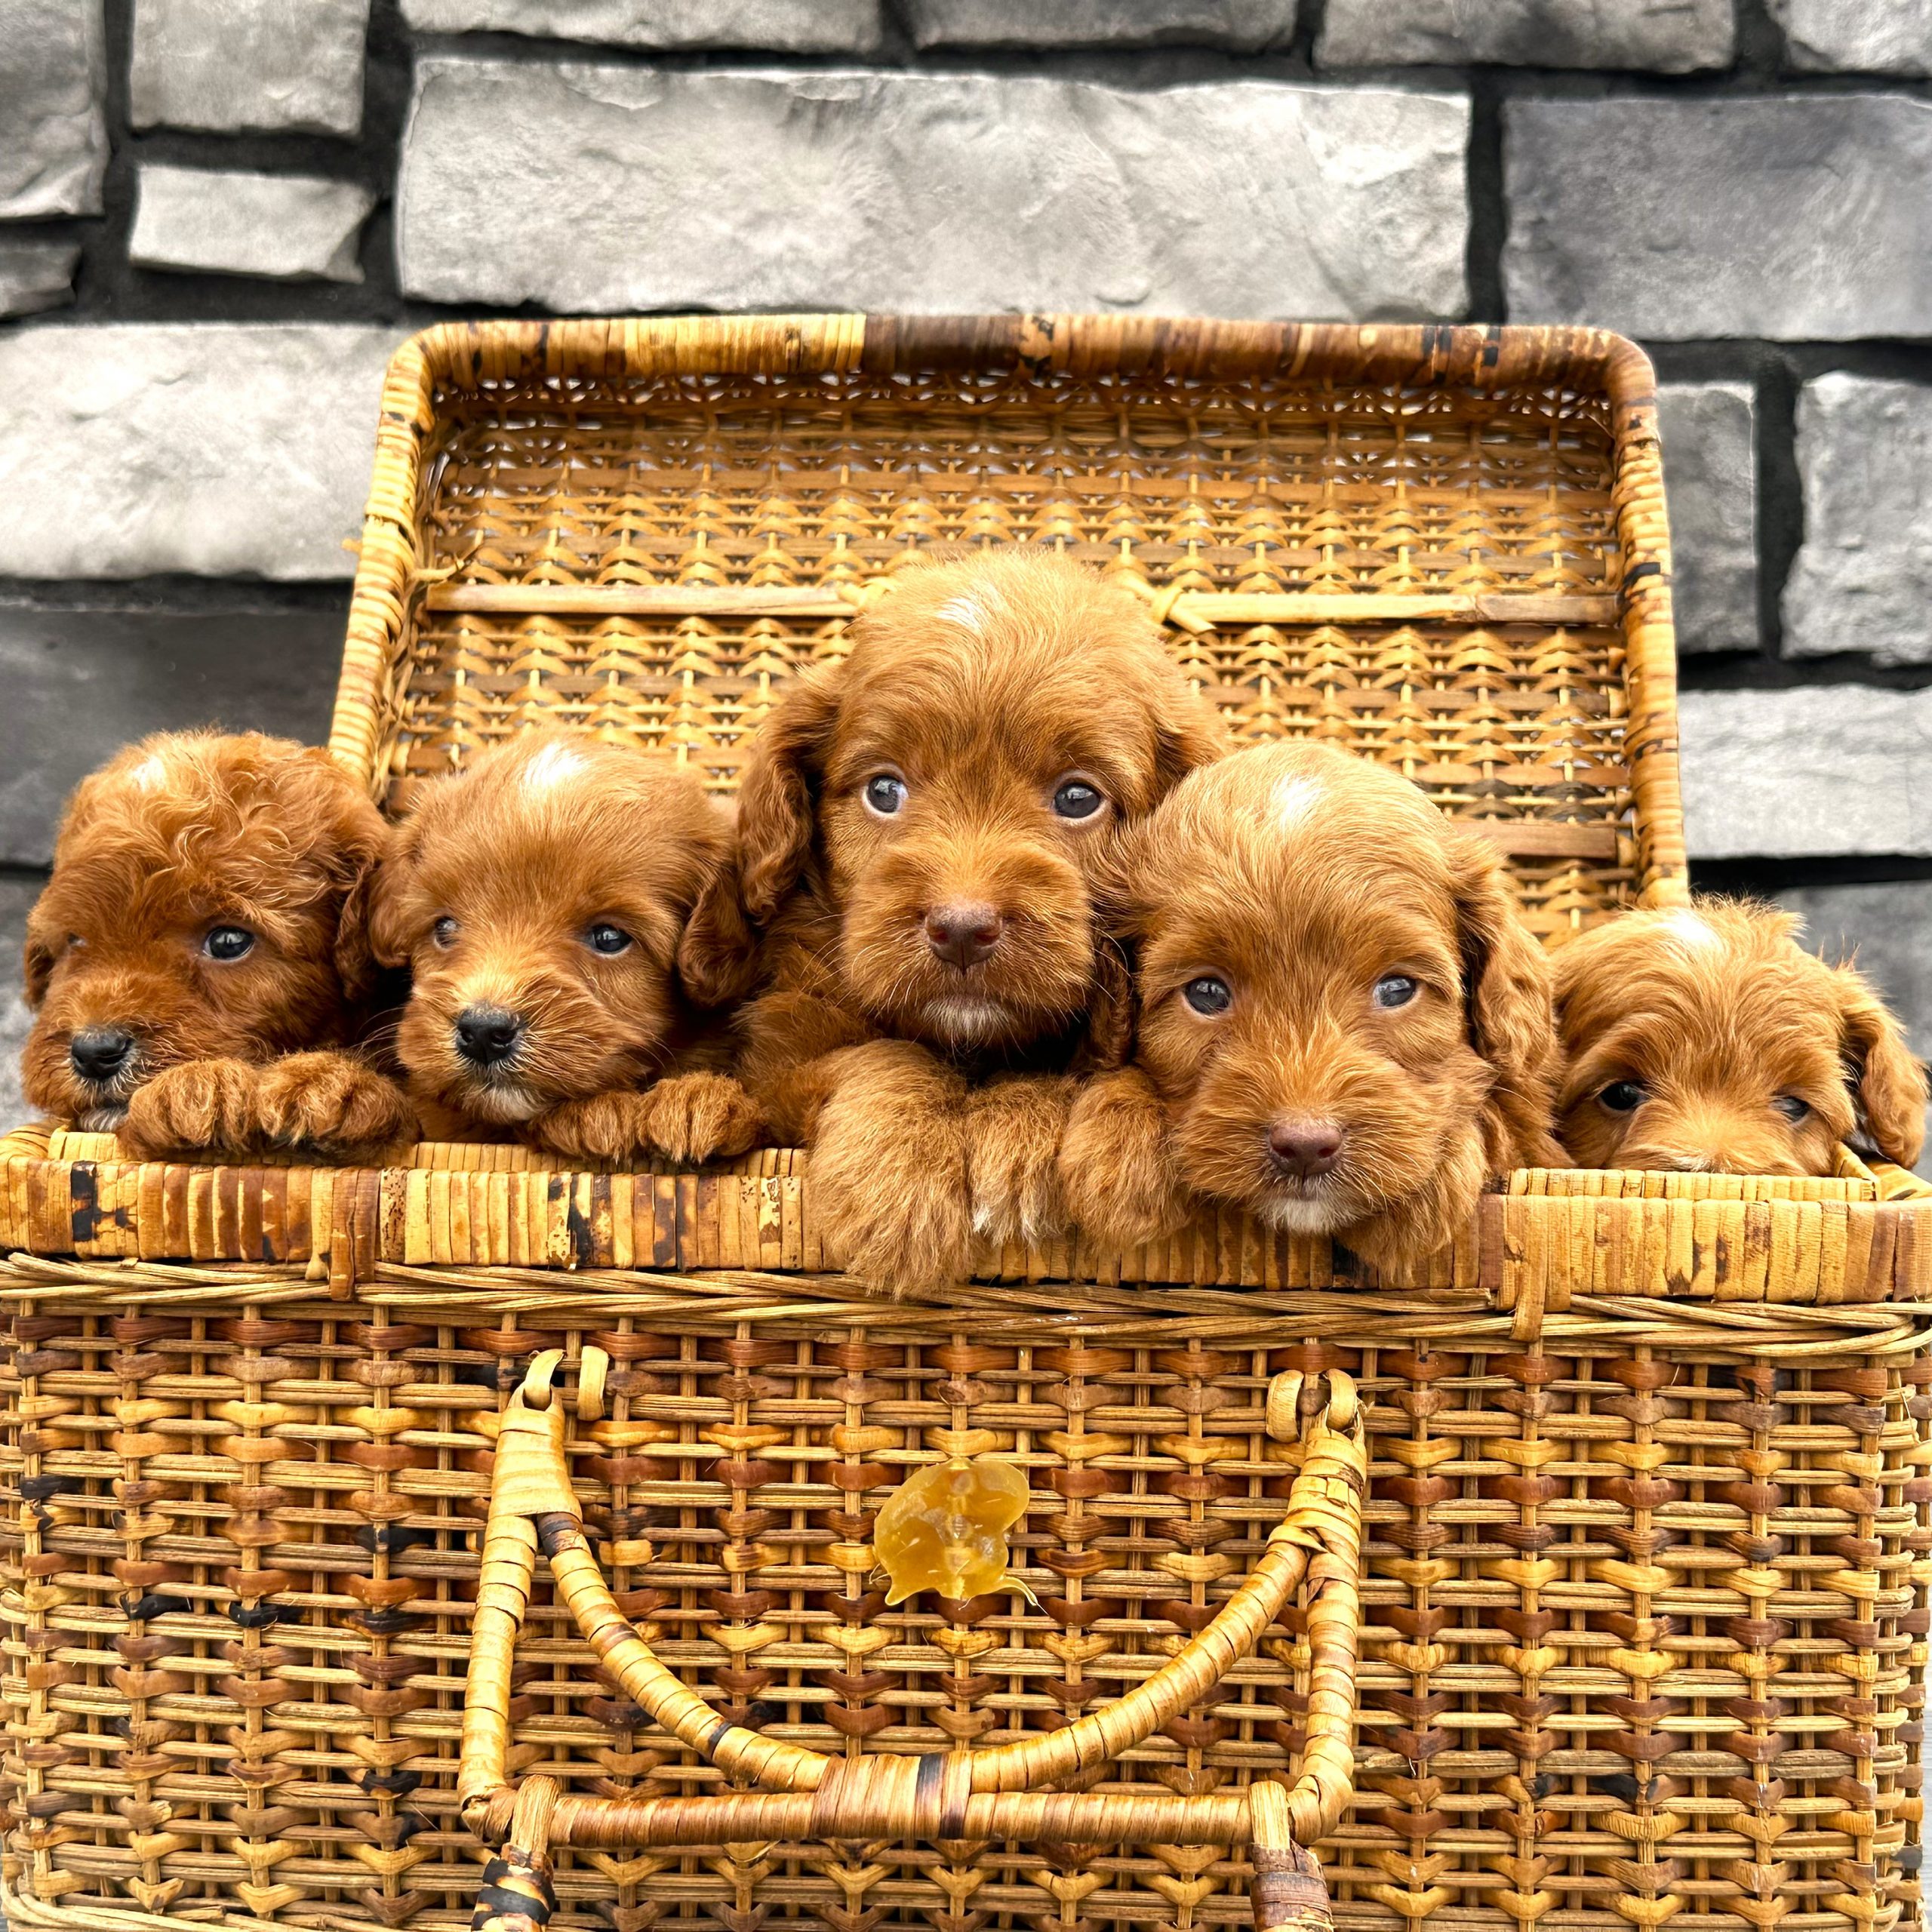 Puppies for sale sitting in a basket